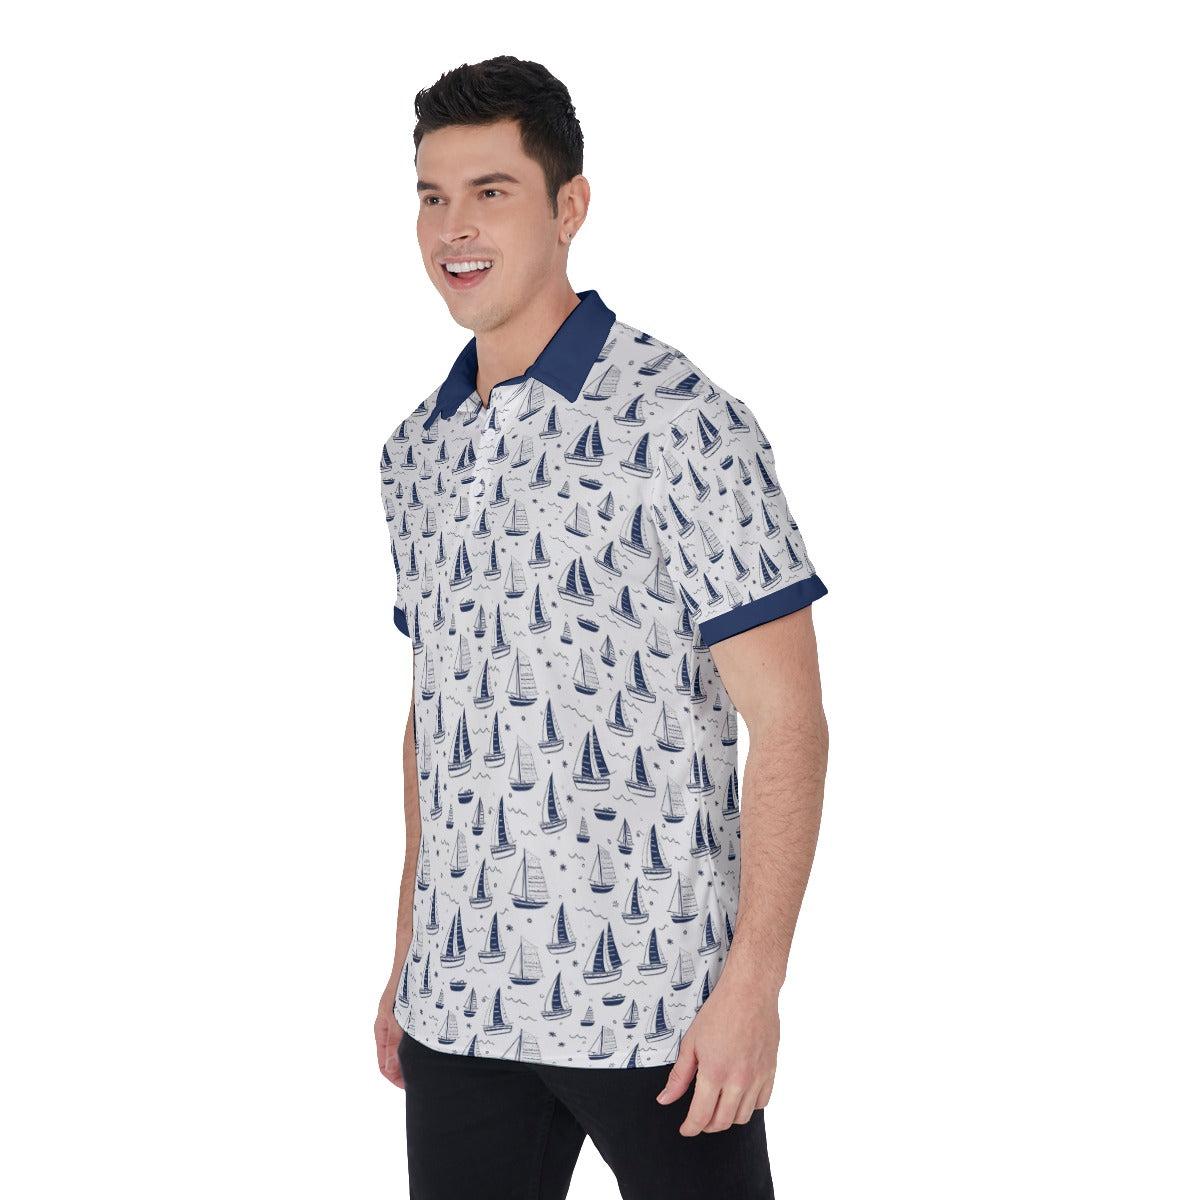 Sailing Boats Men Polo Shirt, Navy Blue White Golf Casual Summer Buttoned Down Up Collared Short Sleeve Sports Tee Top